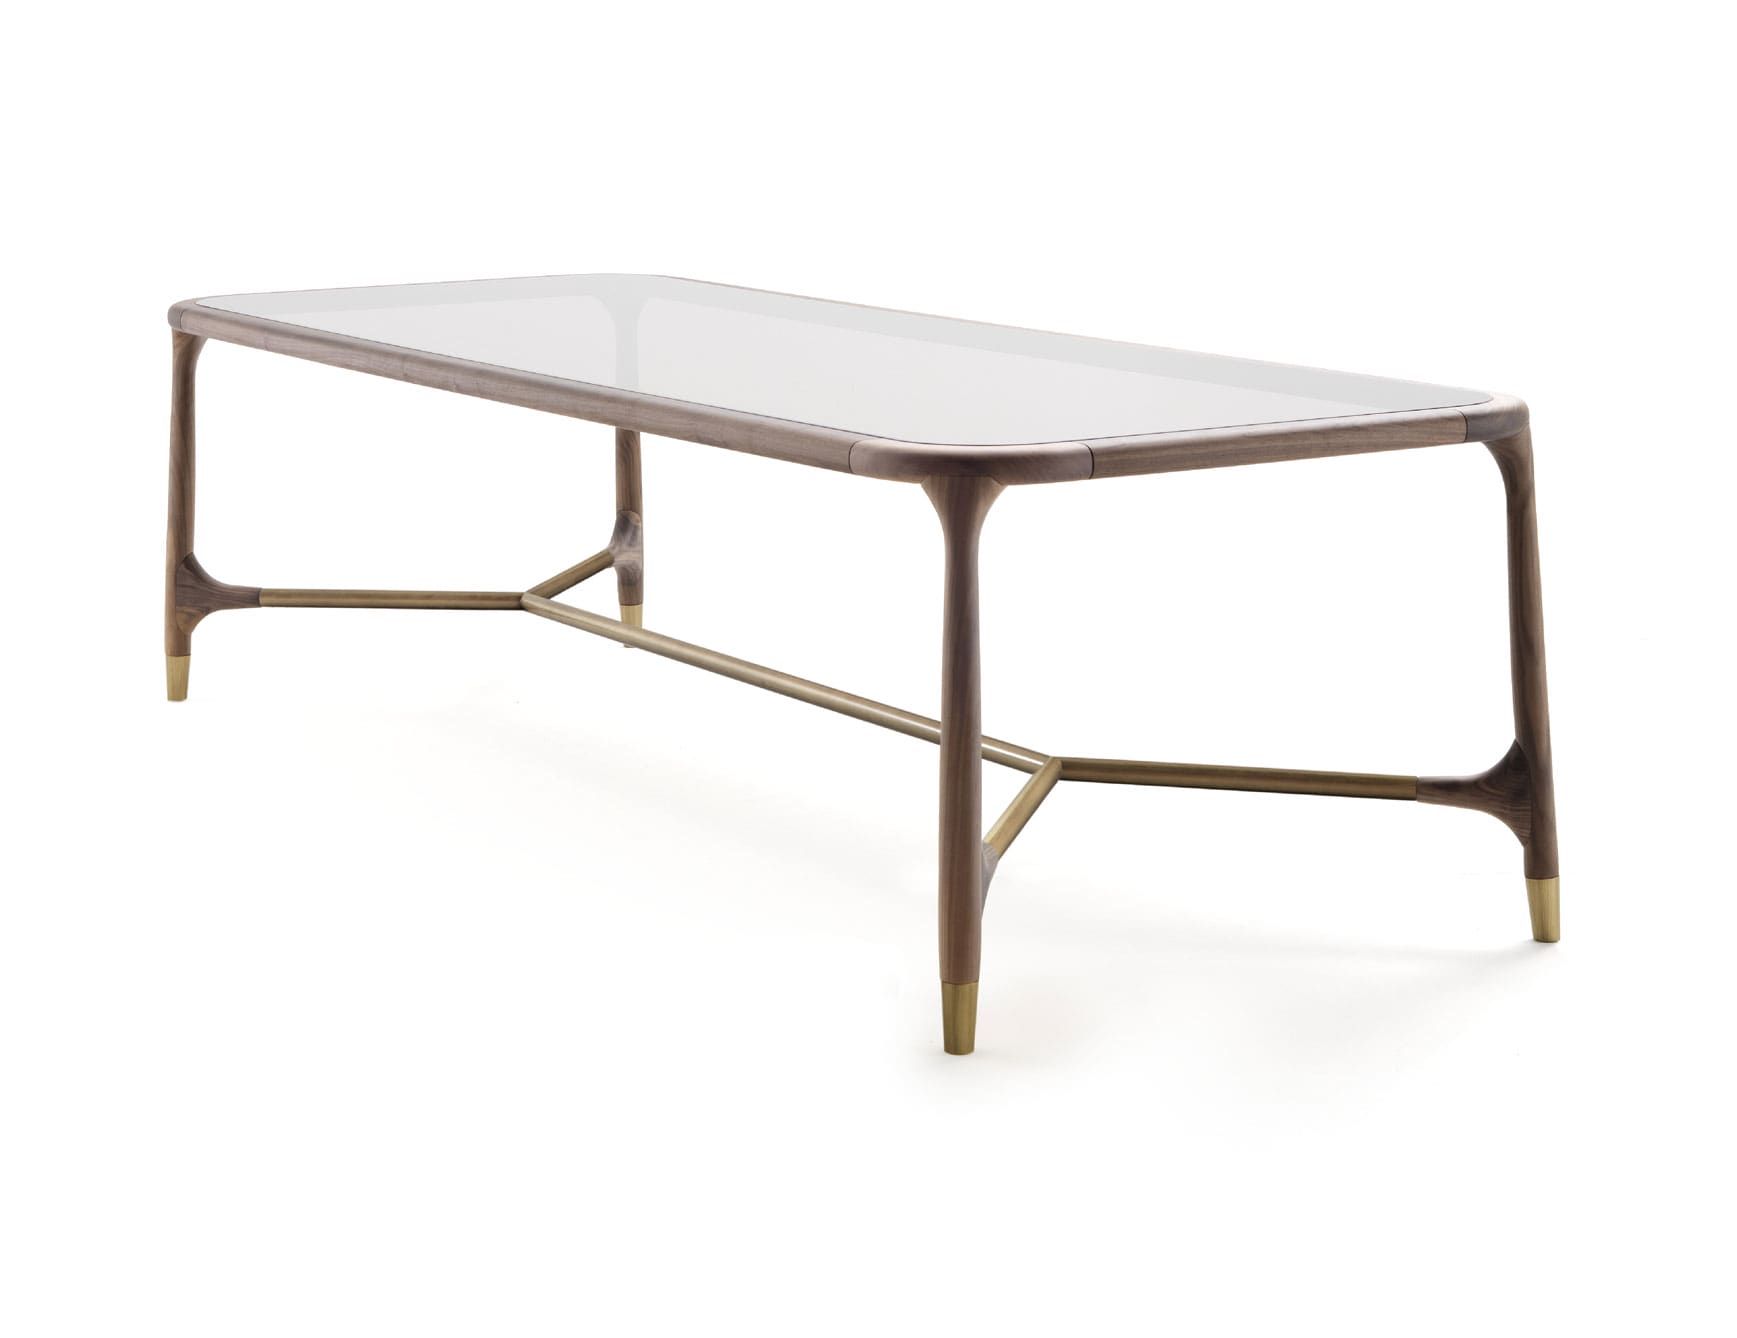 Elisee modern Italian table with brown glass